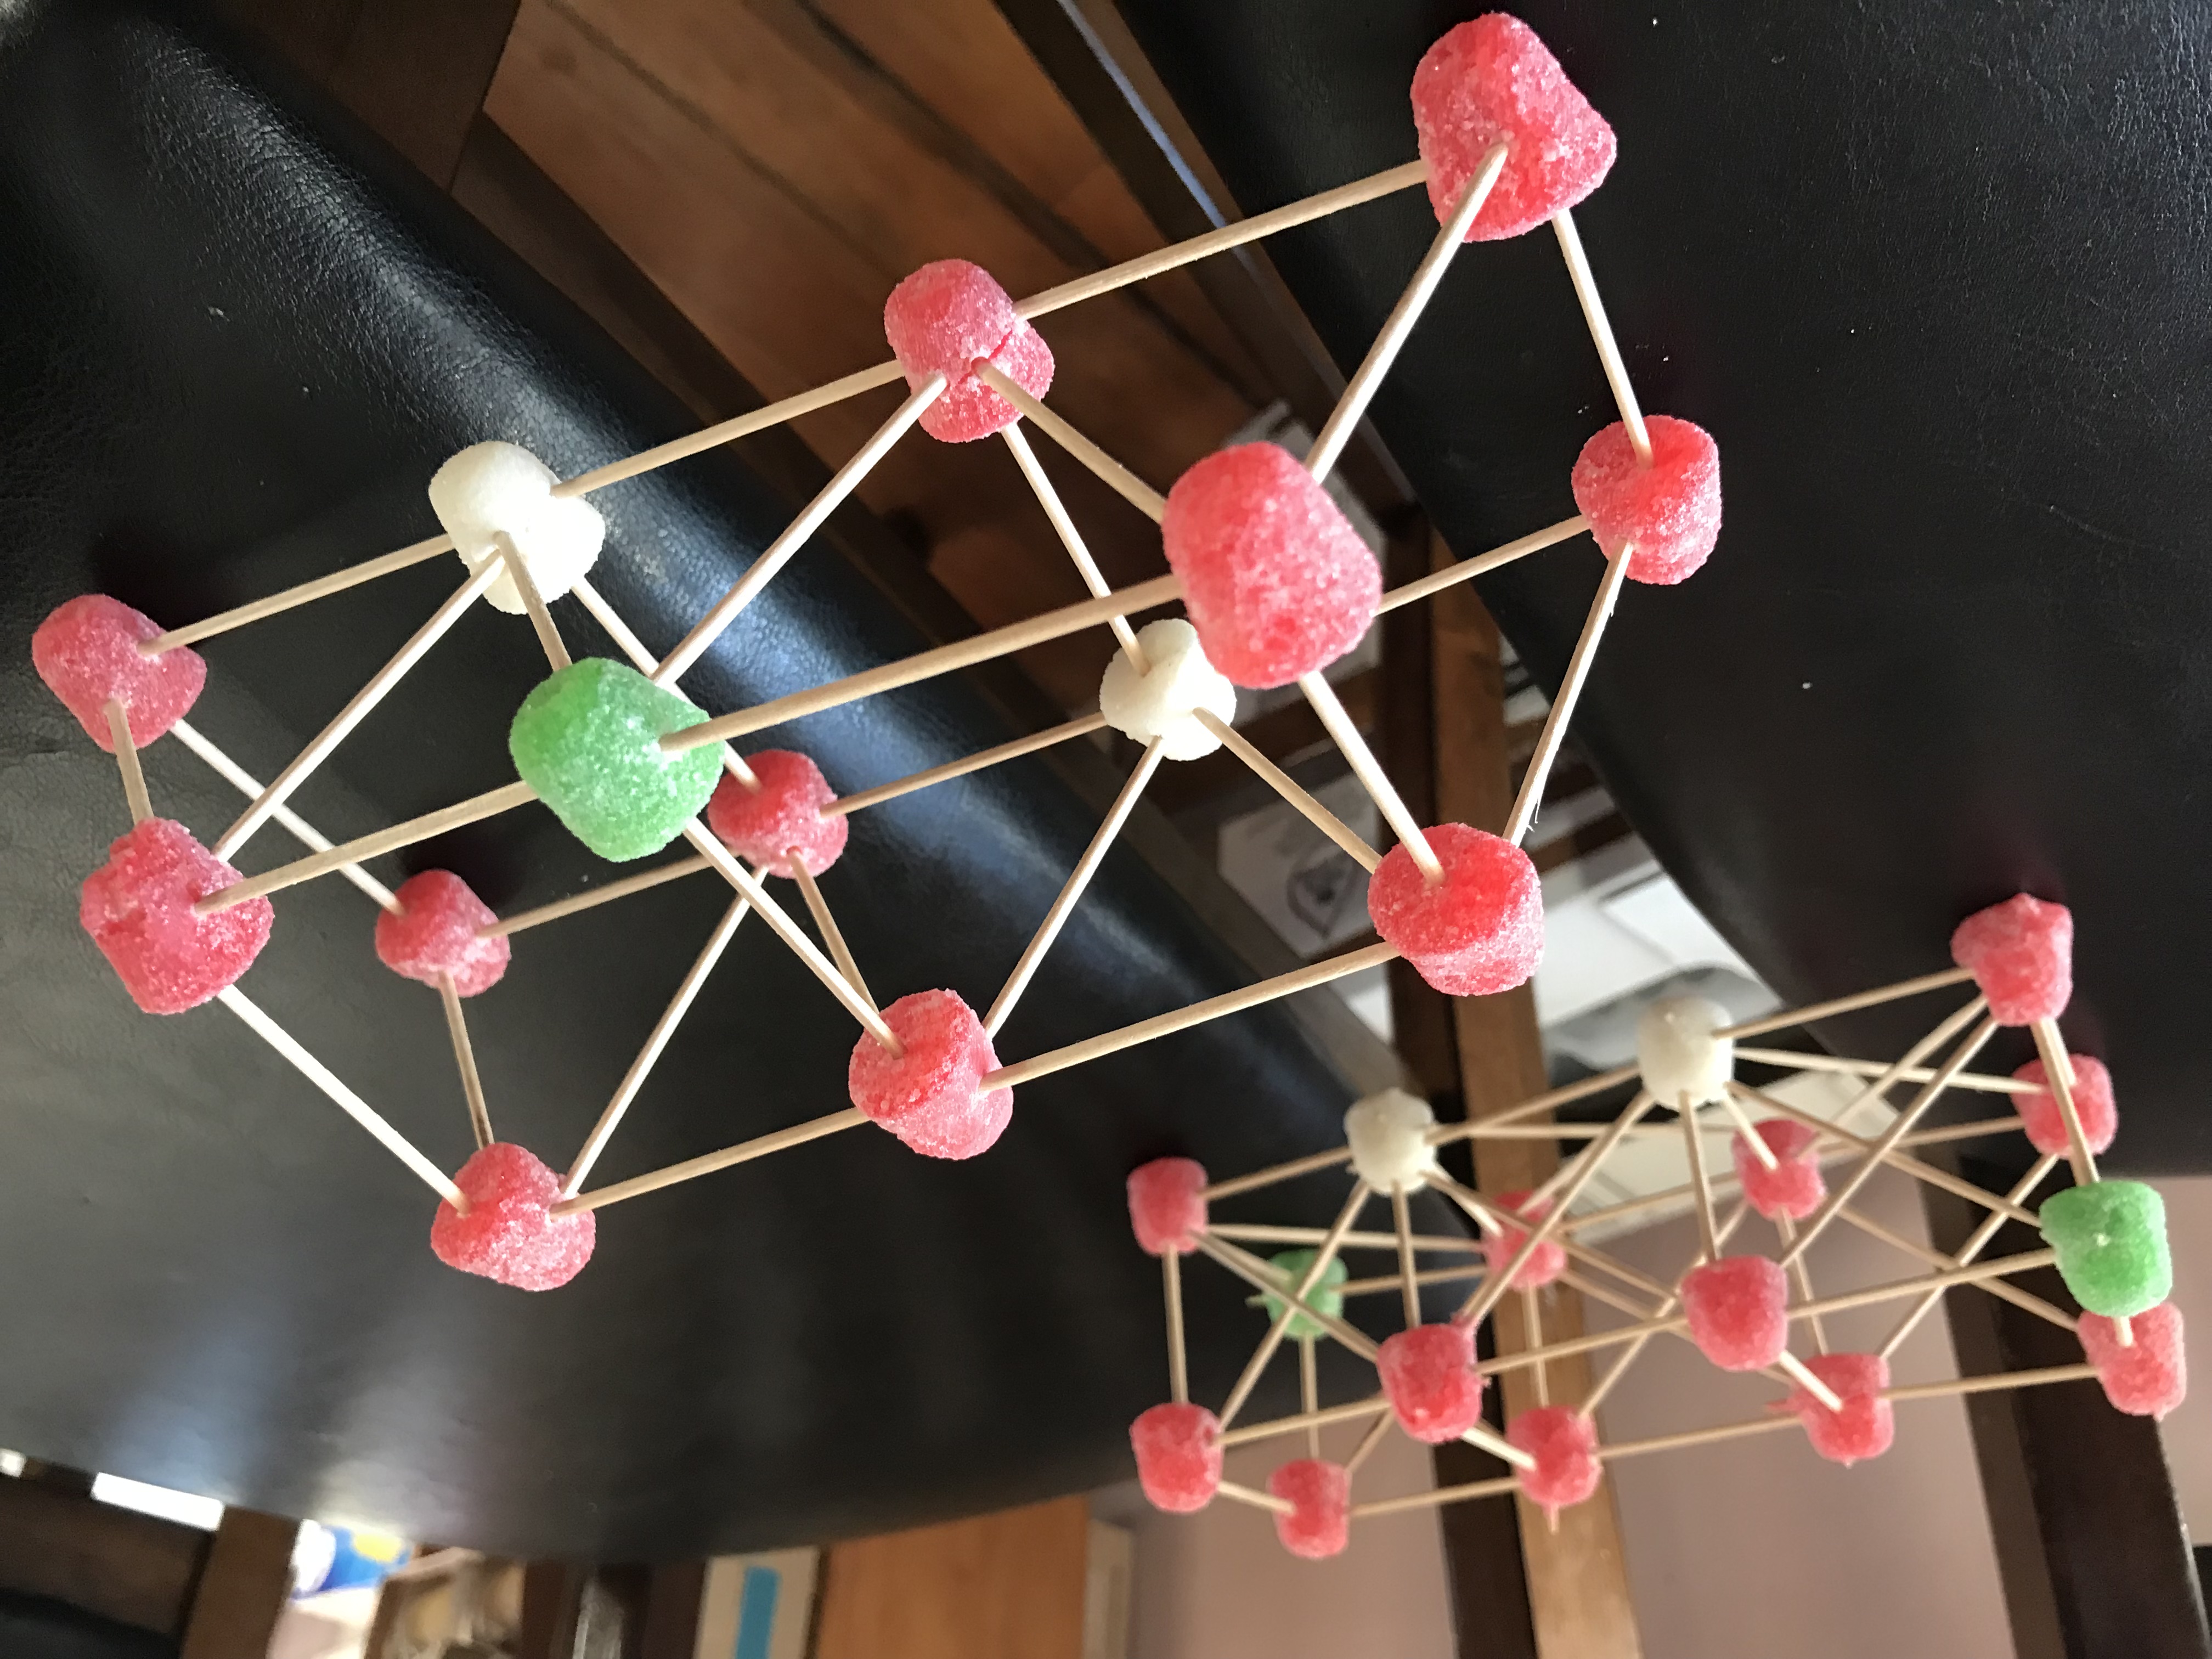 Two truss bridges made of gumdrops and toothpicks.